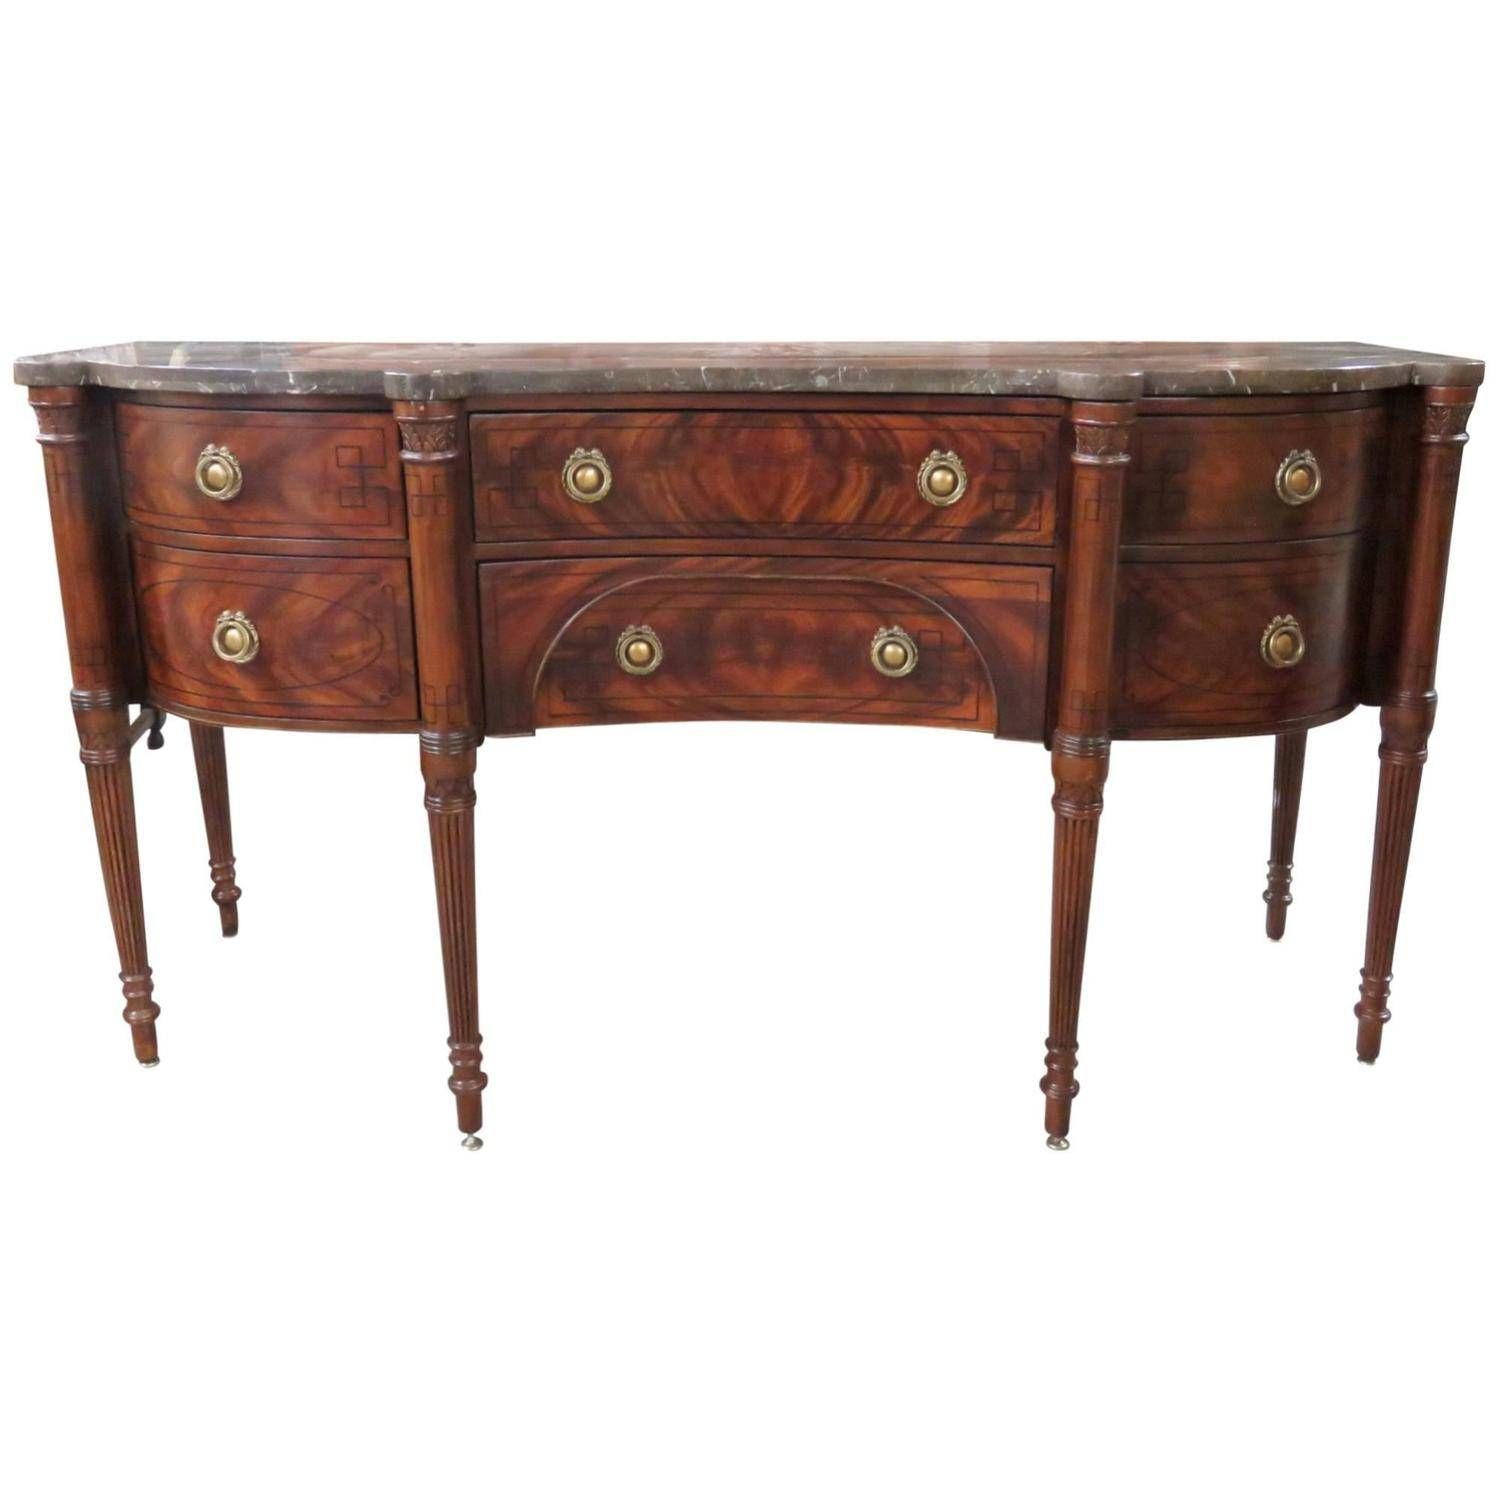 Drexel Heritage Chinoiserie Sideboard For Sale At 1stdibs Throughout Chinoiserie Sideboards (View 3 of 30)